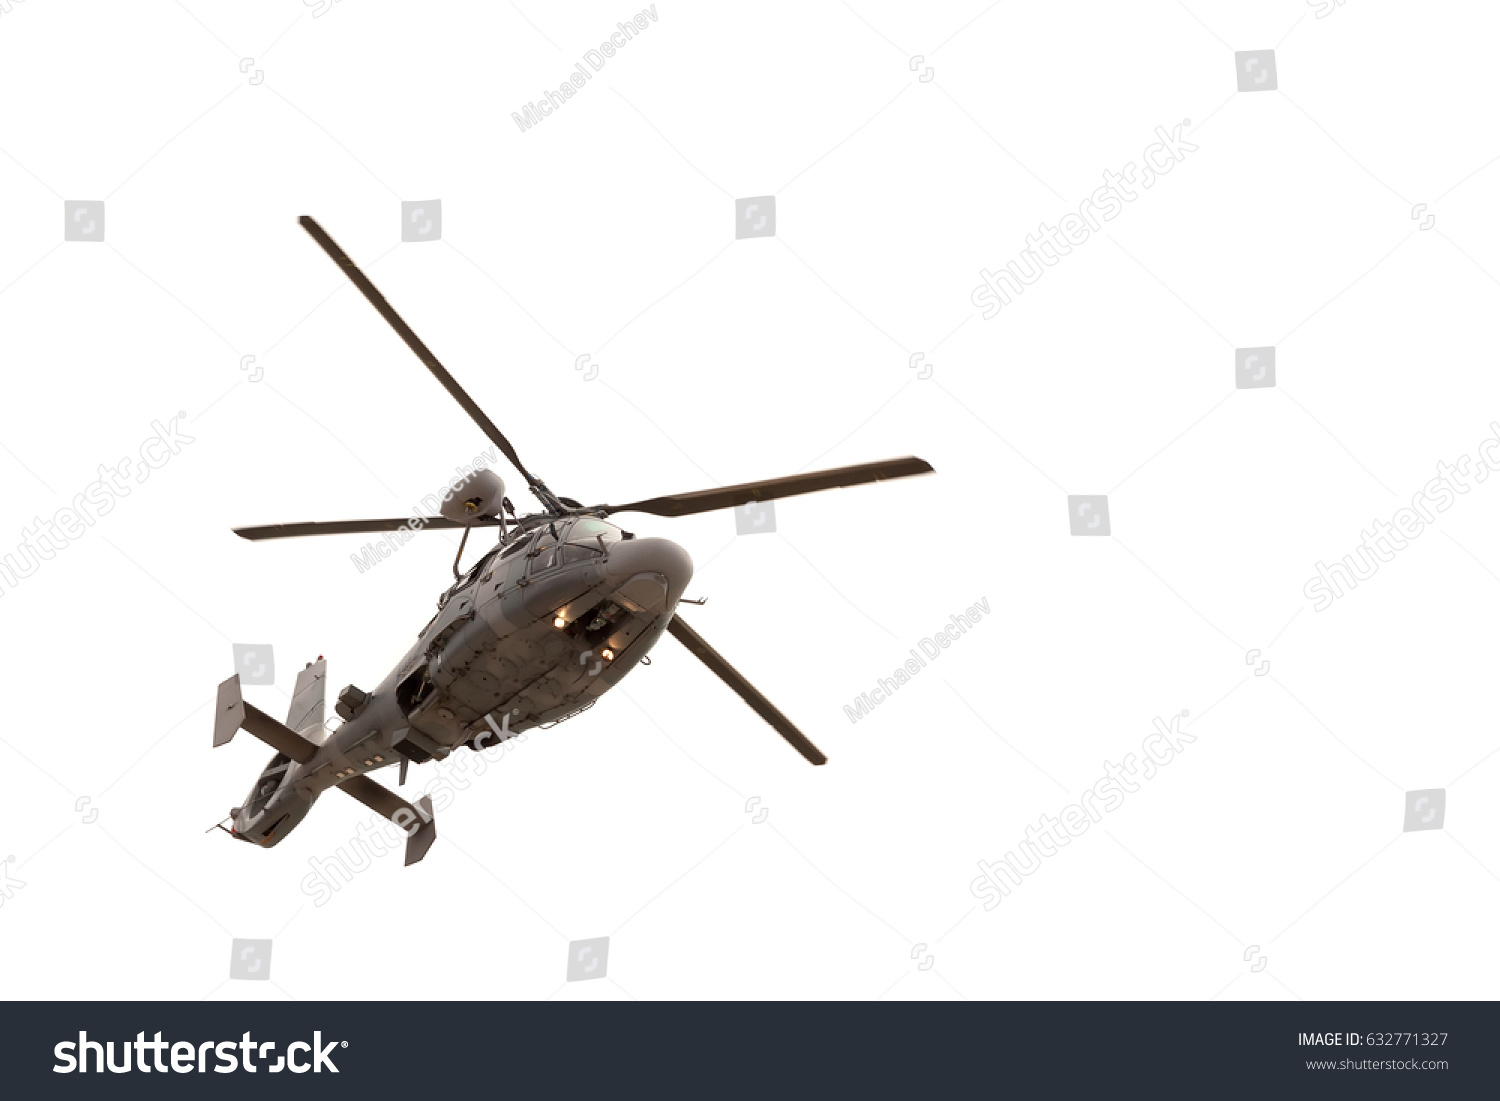 Military helicopter in flight, isolated on white #632771327